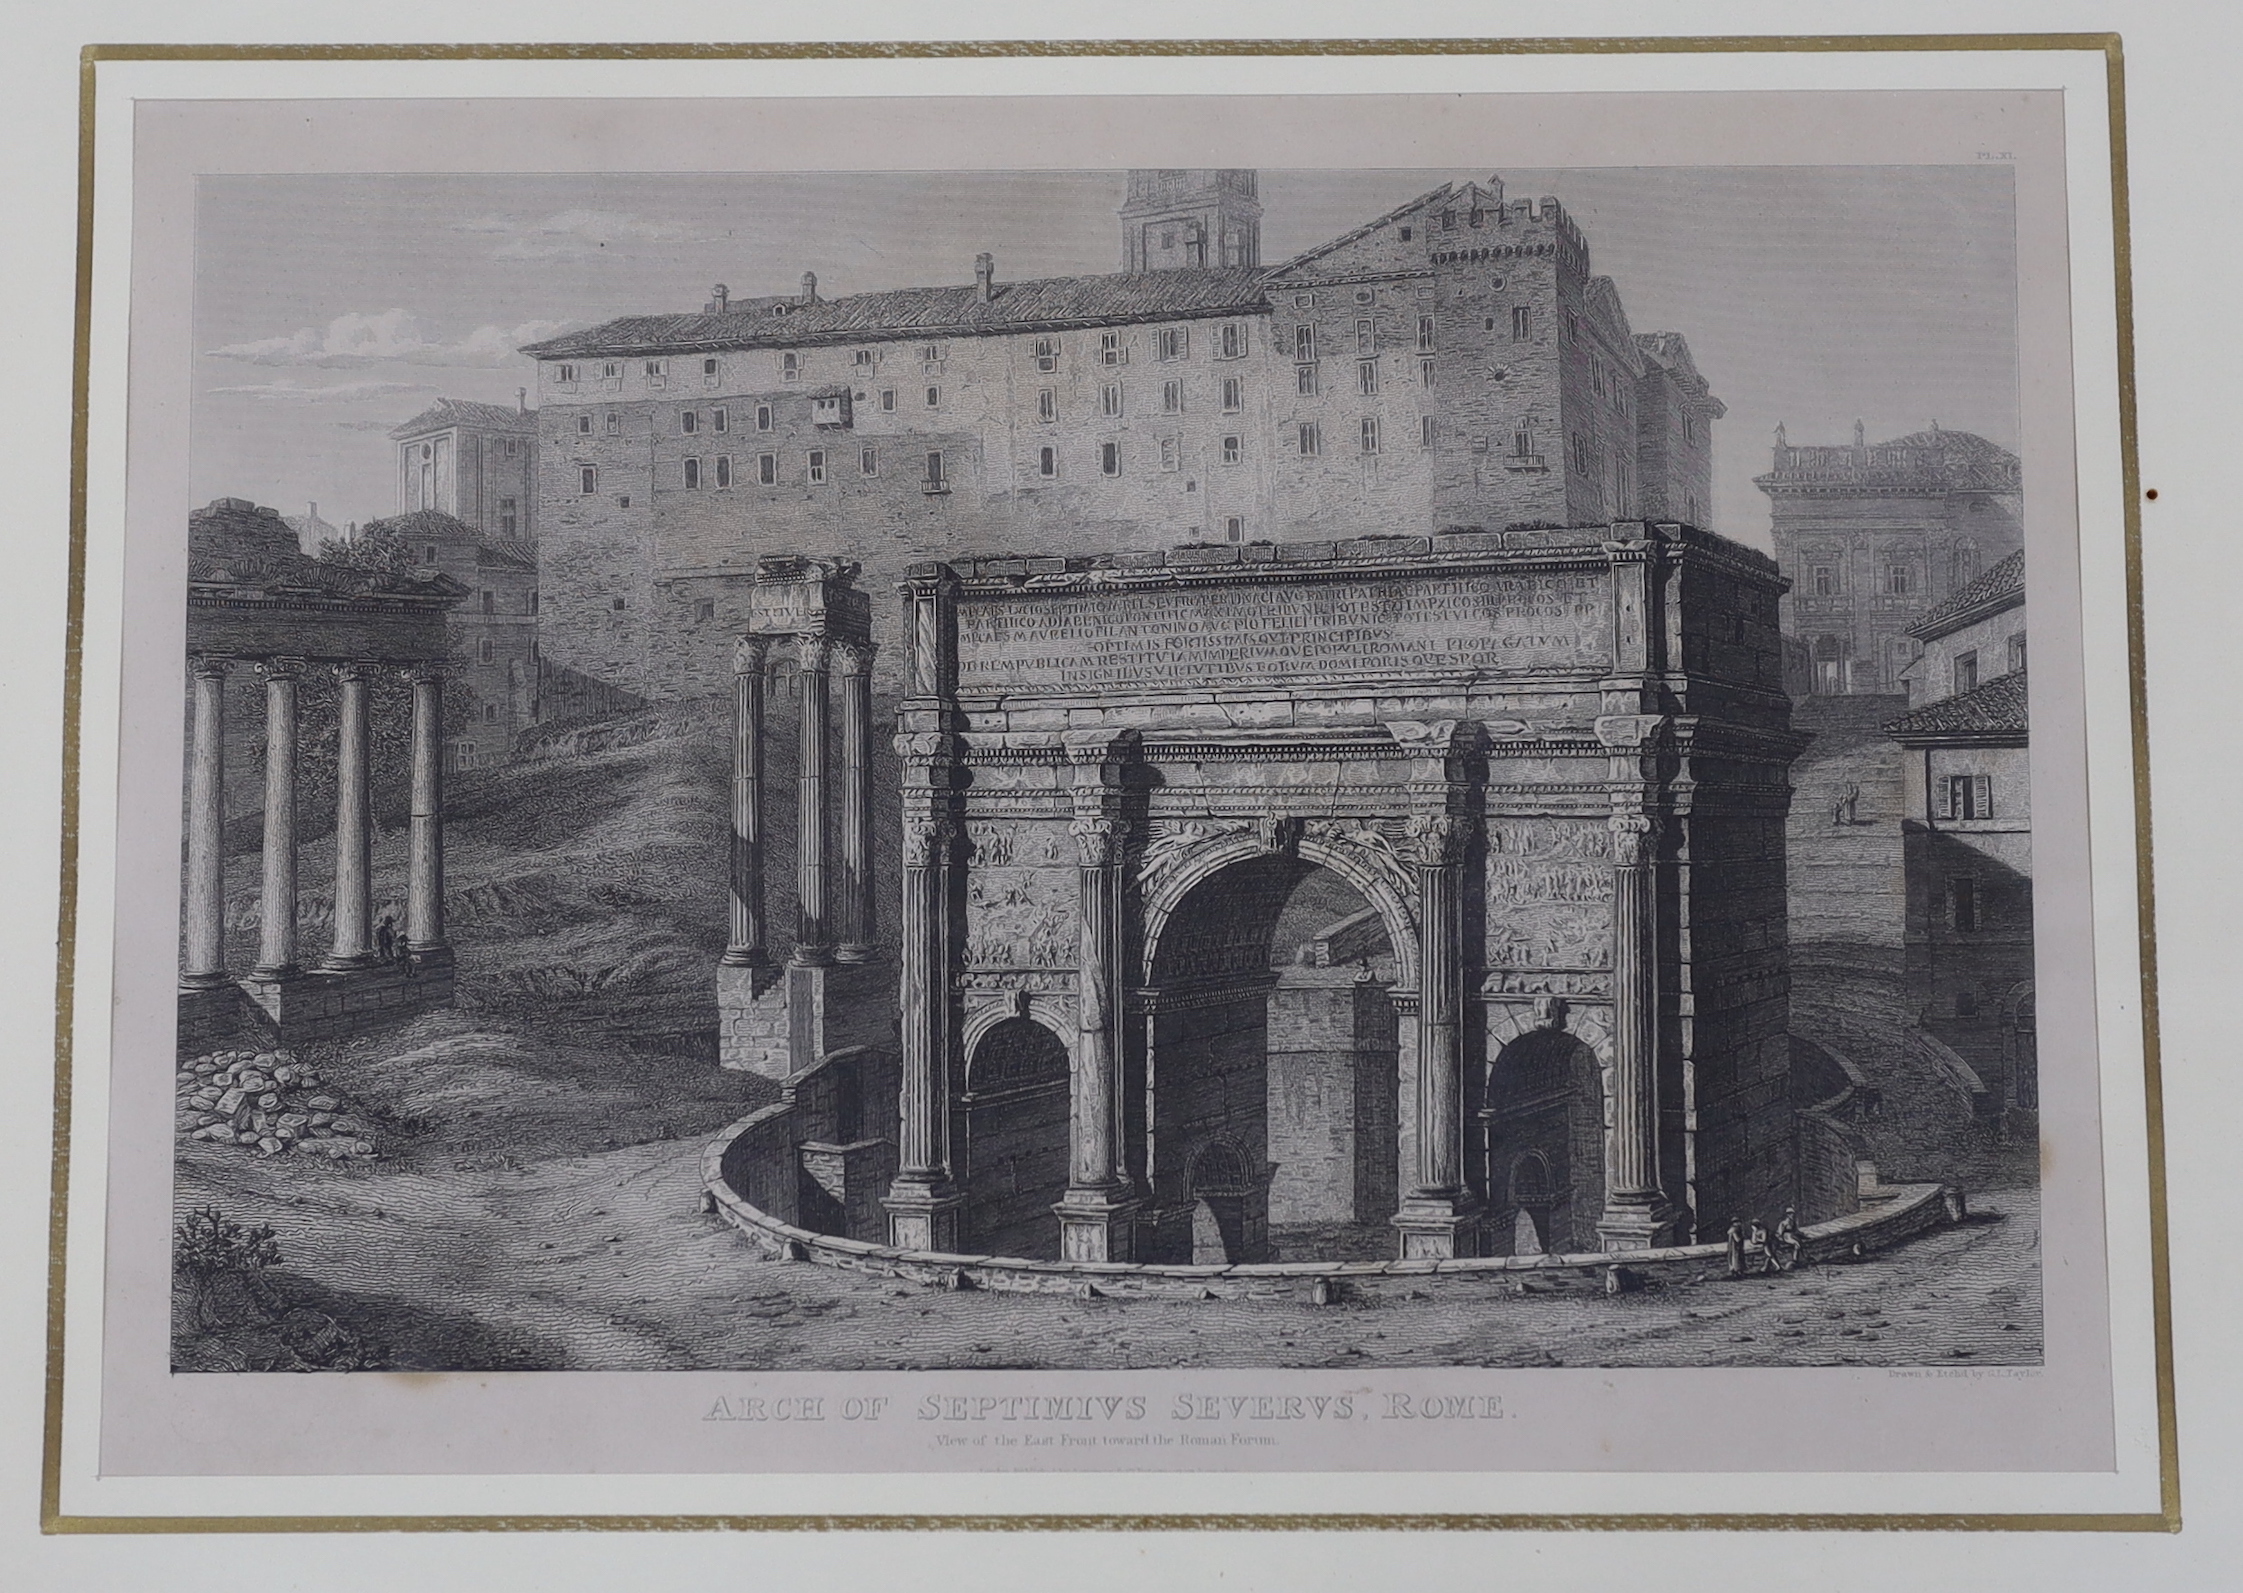 After G.L. Taylor (1788-1873), pair of engravings, 'The Colosseum, Rome' and 'Arch of Septimus Severus', Rome', 29 x 42cm